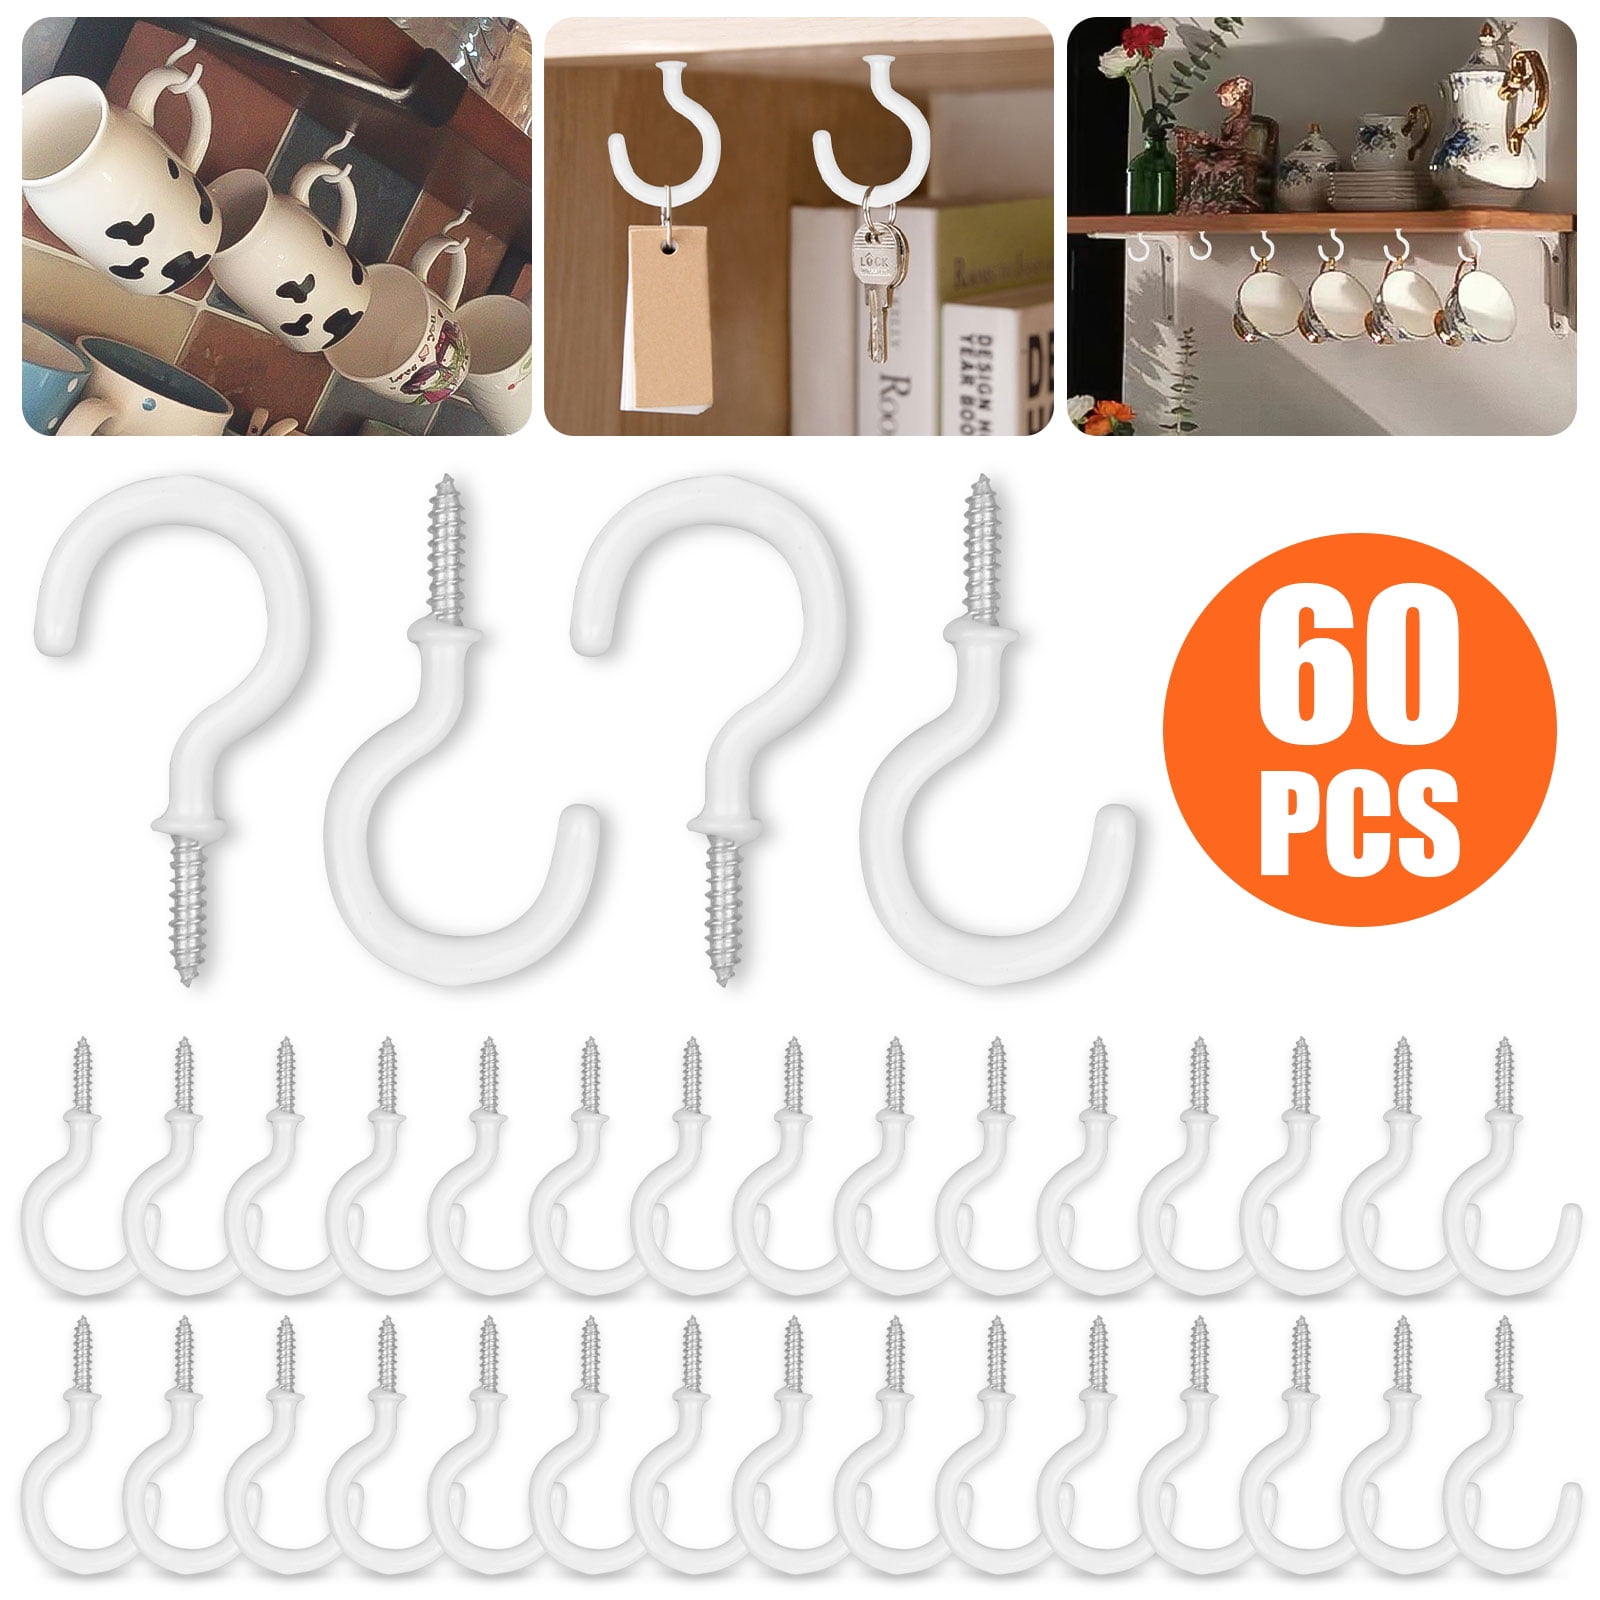 50 Pcs Ceiling Hooks for Hanging White, 1-1/4 Inch Light Outdoor Indoor Porch Bathroom Kitchen Wall Hooks Set for Coffee Tea Cup Mug 1-1/4 Inch Vinyl Coated Screw-in Hooks Plant